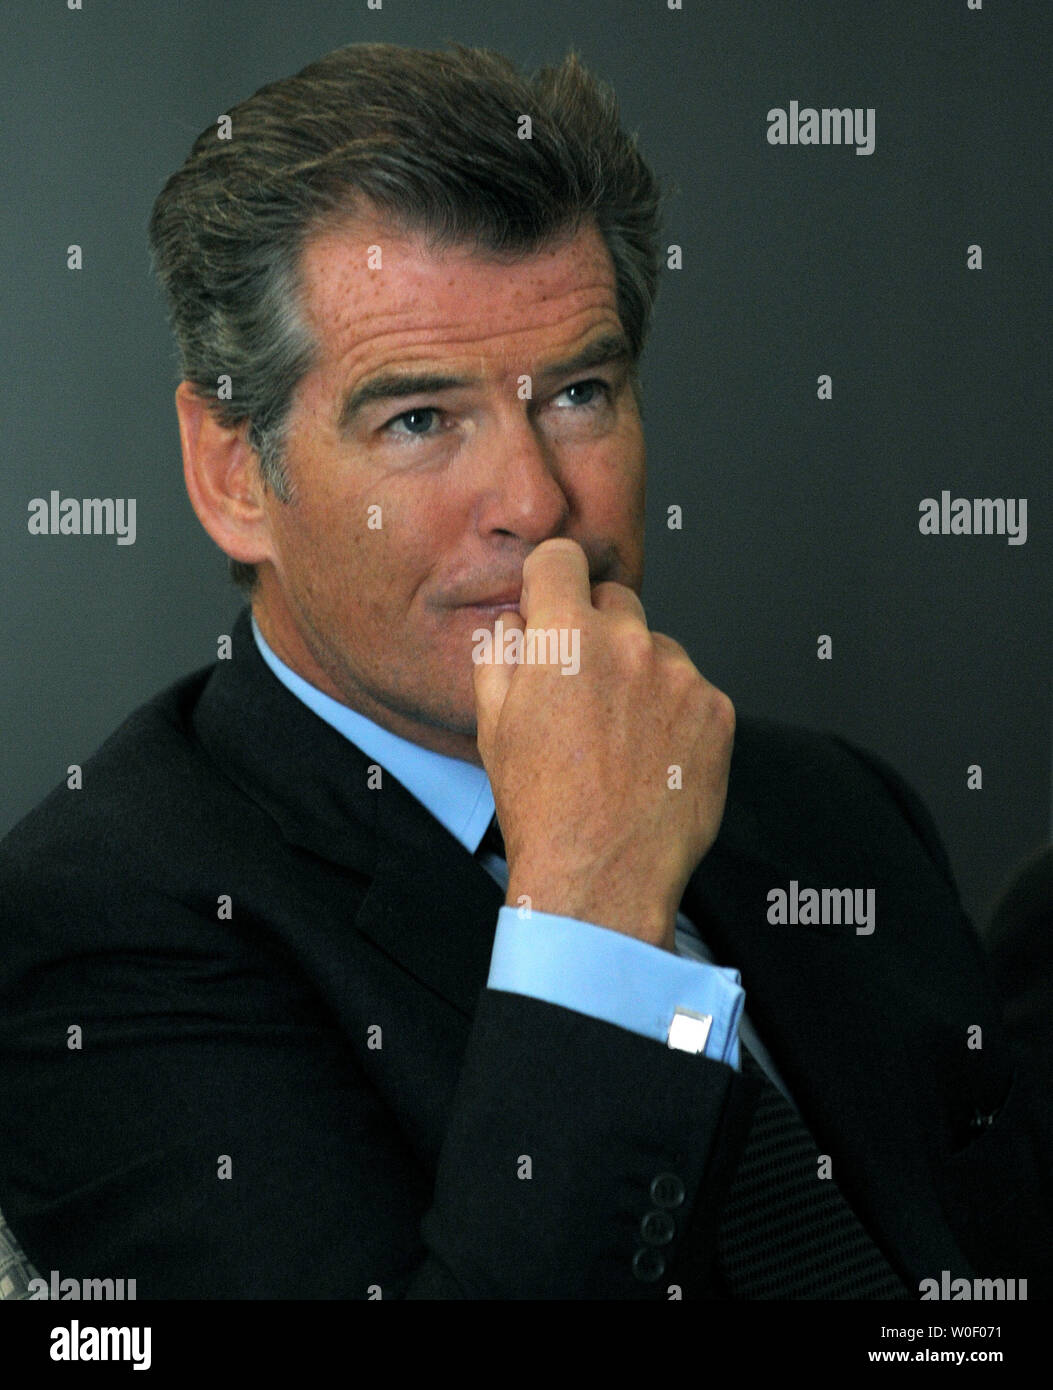 Actor Pierce Brosnan participates in an Environmental Protection Agency (EPA) public hearing on carbon dioxide and other global warming pollutions that present a danger to public health and welfare in Arlington, Virginia, on May 18, 2009.    (UPI Photo/Roger L. Wollenberg) Stock Photo